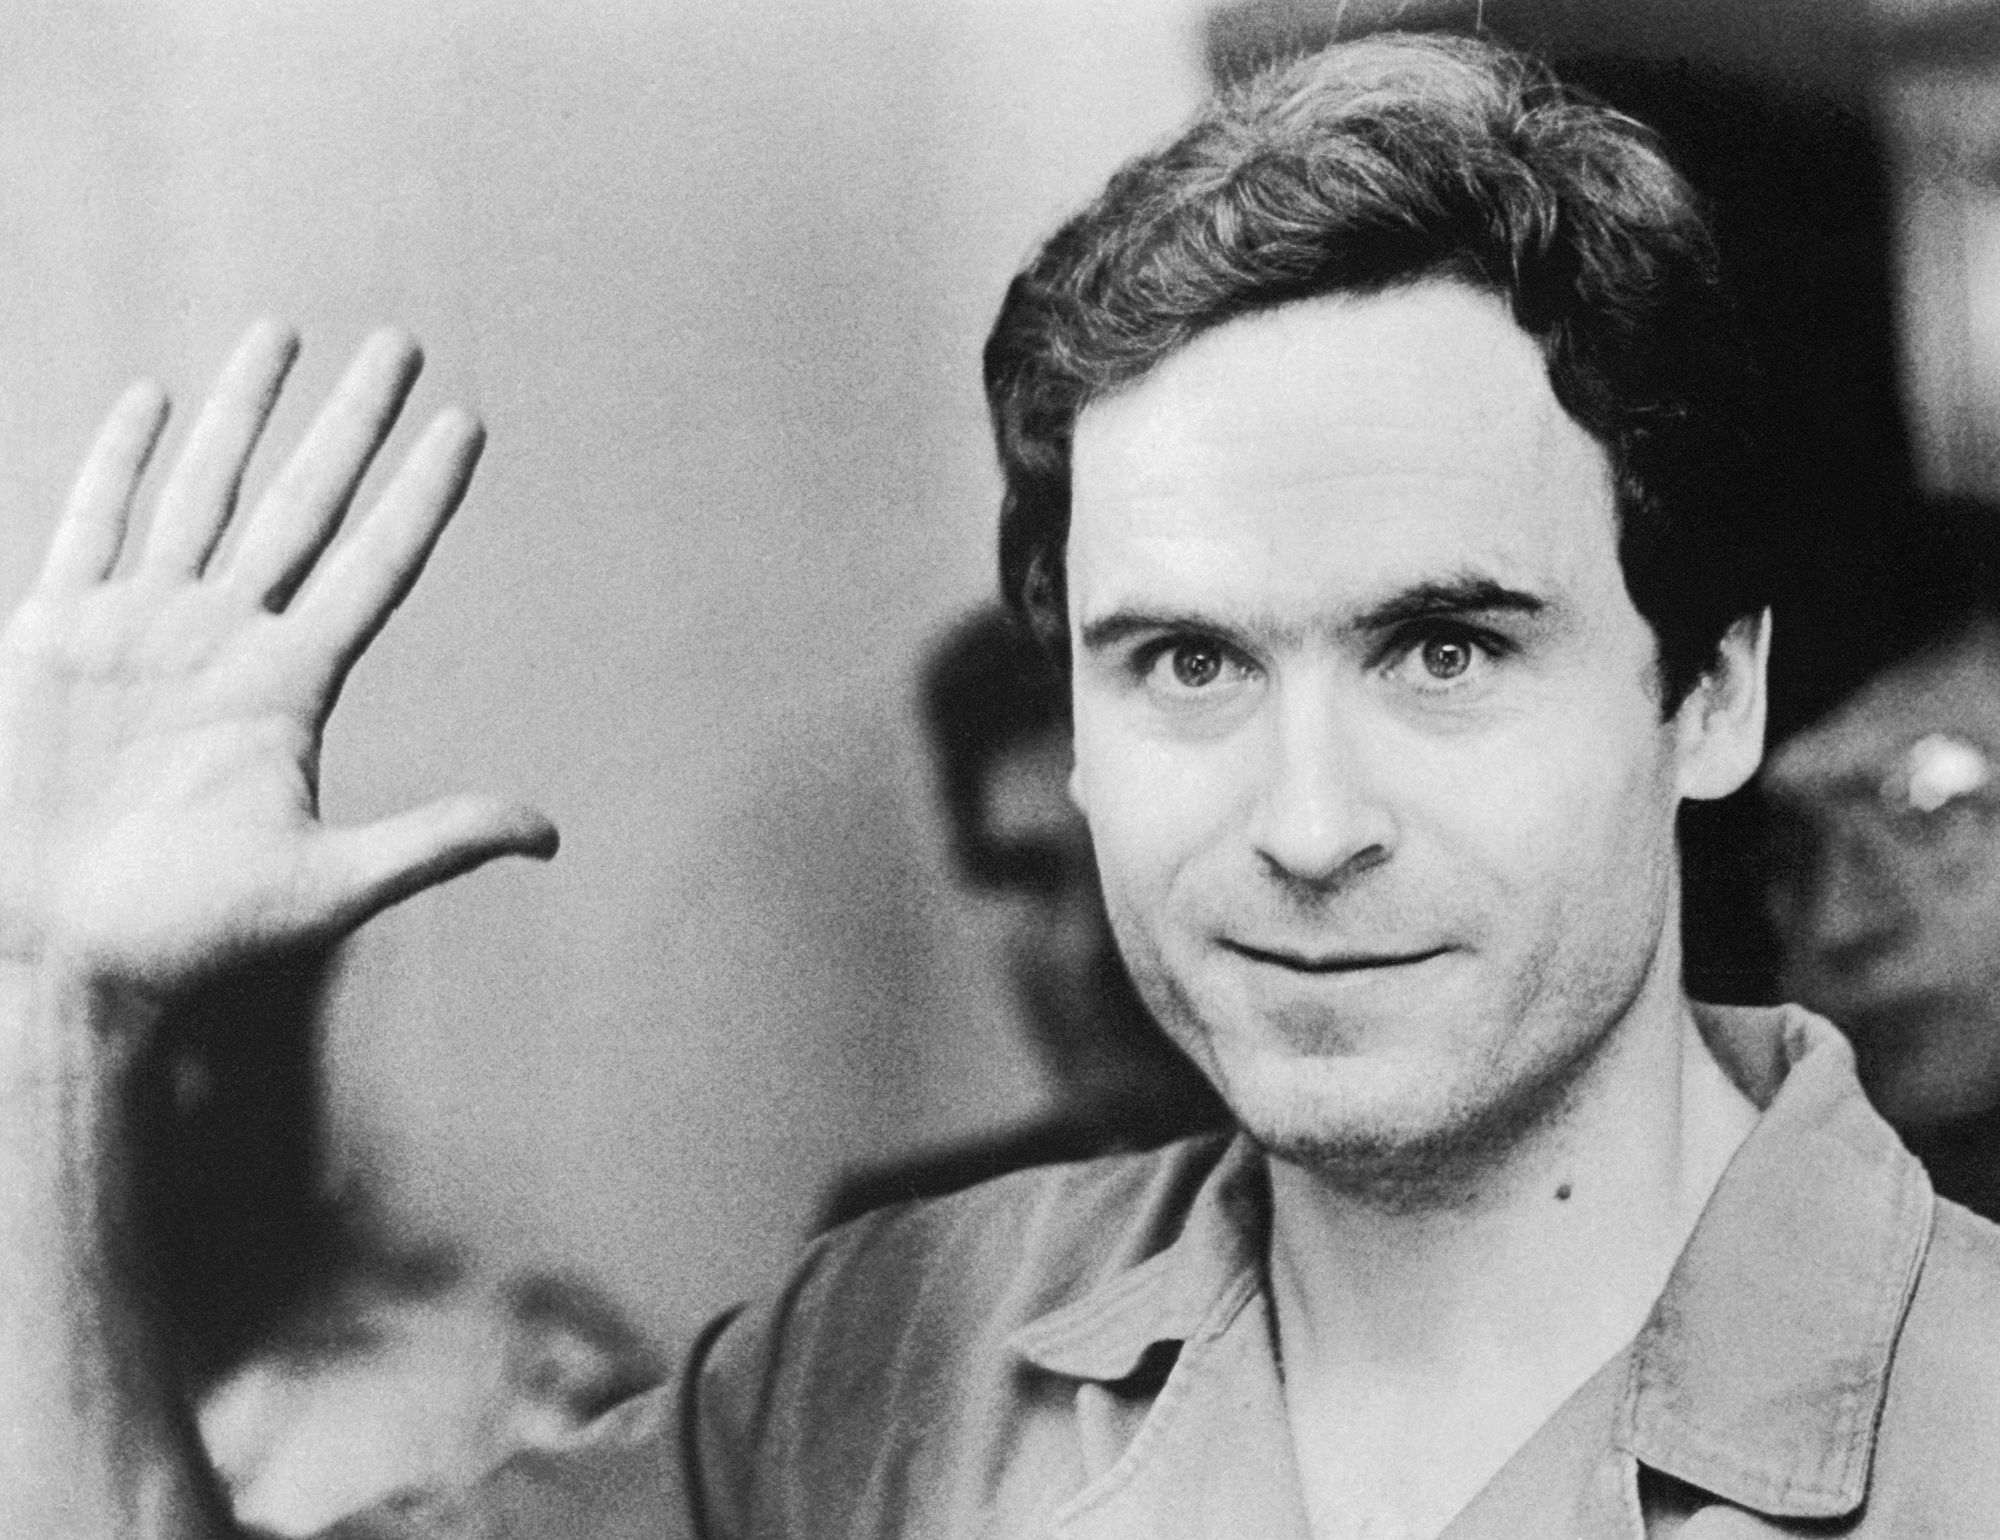 mundstykke Medic Kritik This day in history: Ted Bundy found guilty of killing two sorority sisters